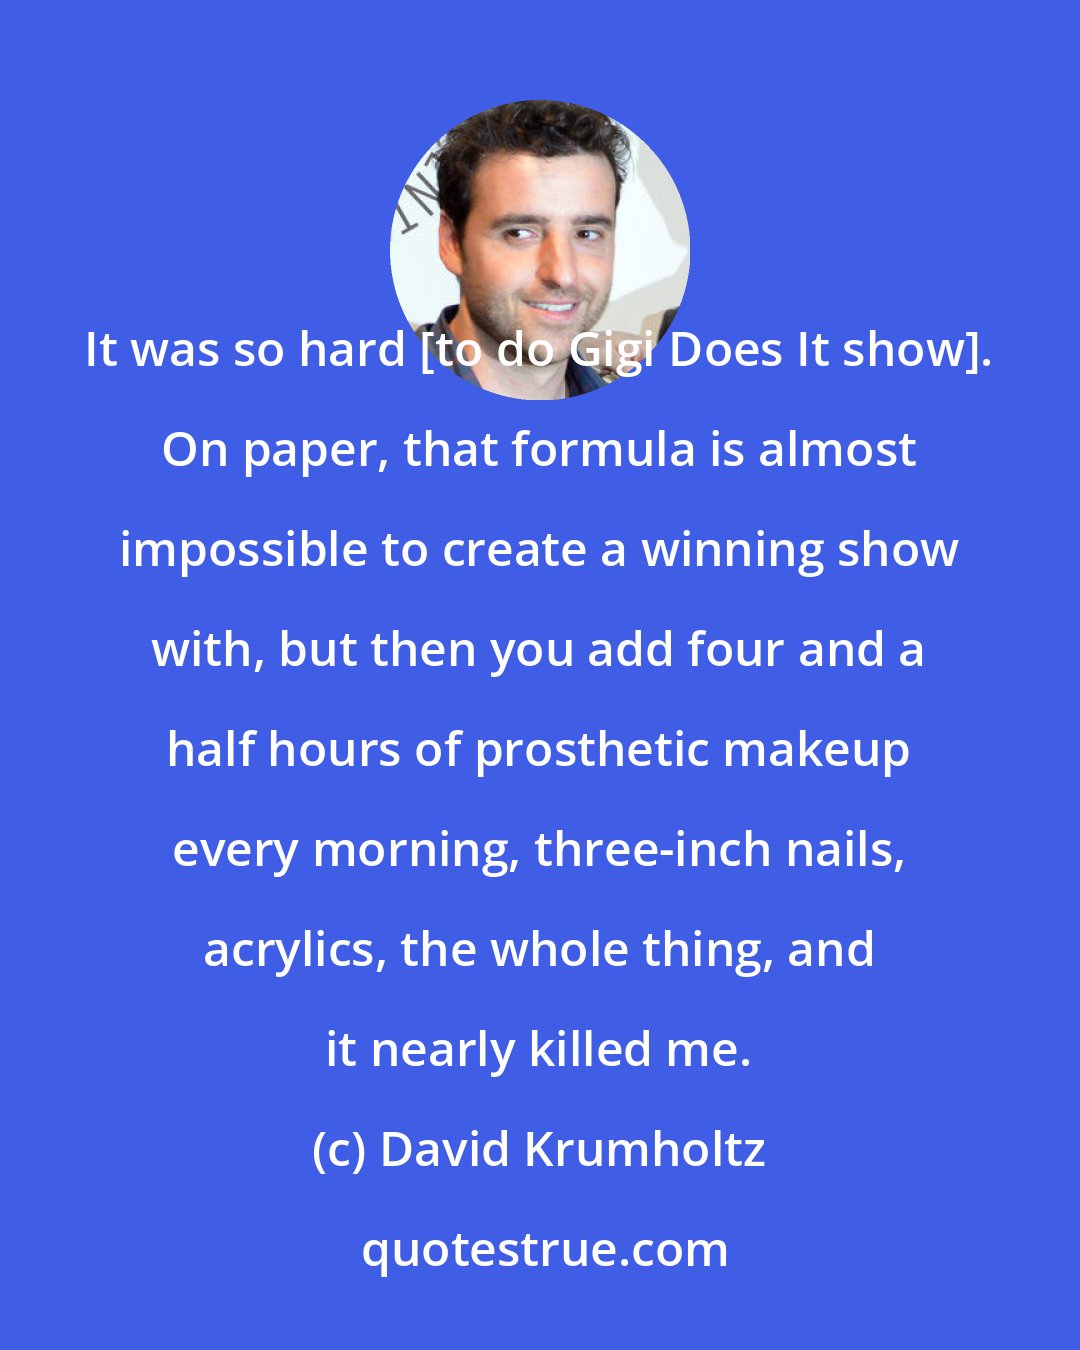 David Krumholtz: It was so hard [to do Gigi Does It show]. On paper, that formula is almost impossible to create a winning show with, but then you add four and a half hours of prosthetic makeup every morning, three-inch nails, acrylics, the whole thing, and it nearly killed me.